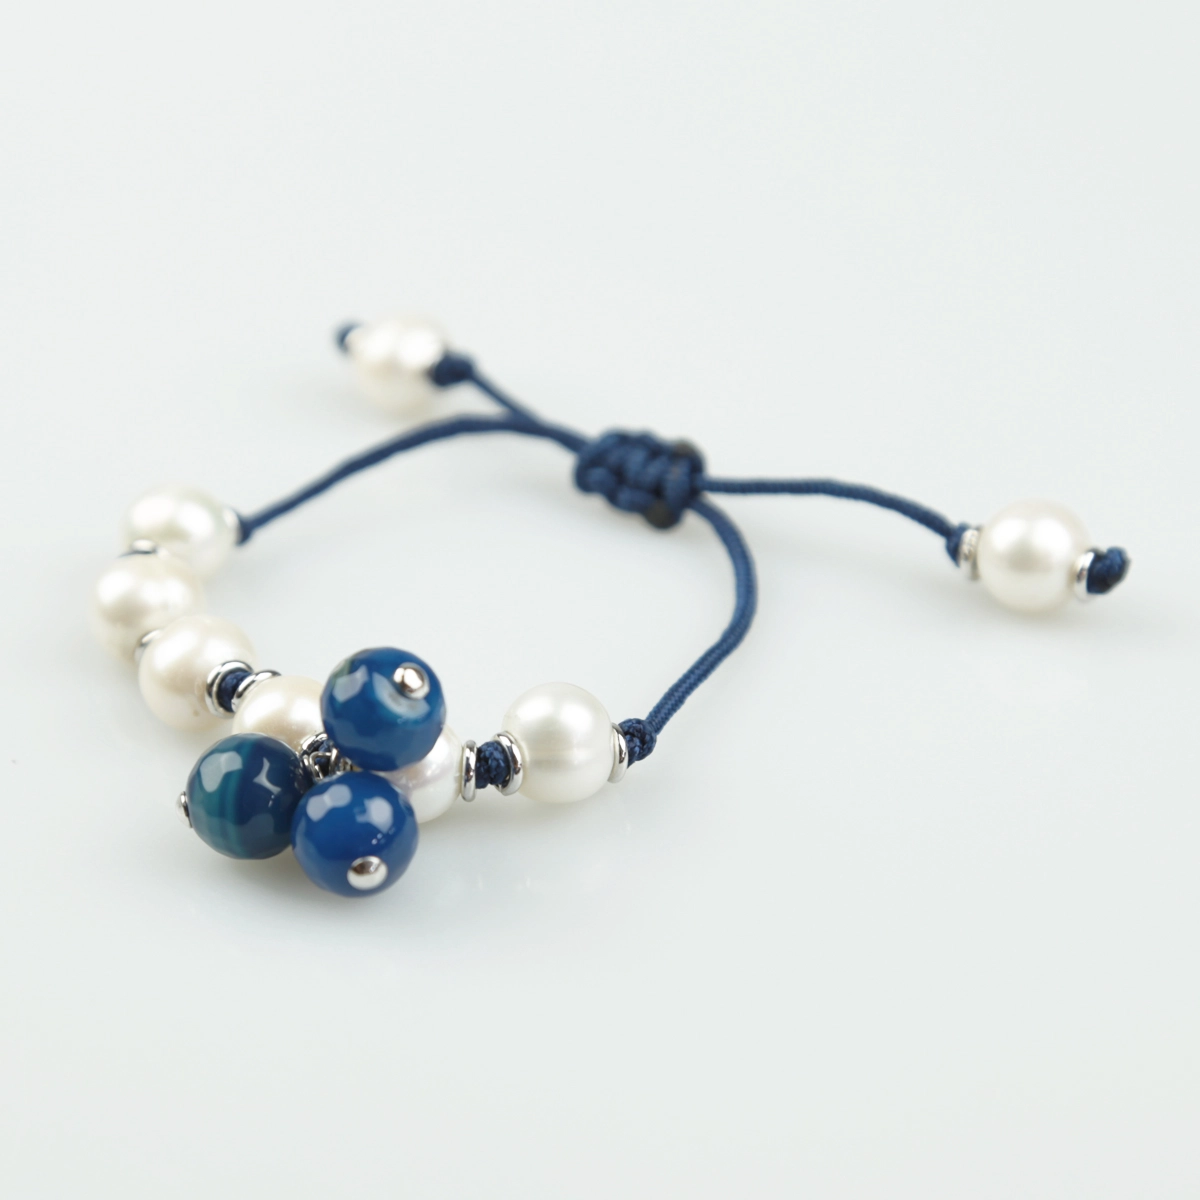 BRACELET KNOTTED WHITE PEARL AND BLUE AGATE FPU54E PATRICIA GARCIA